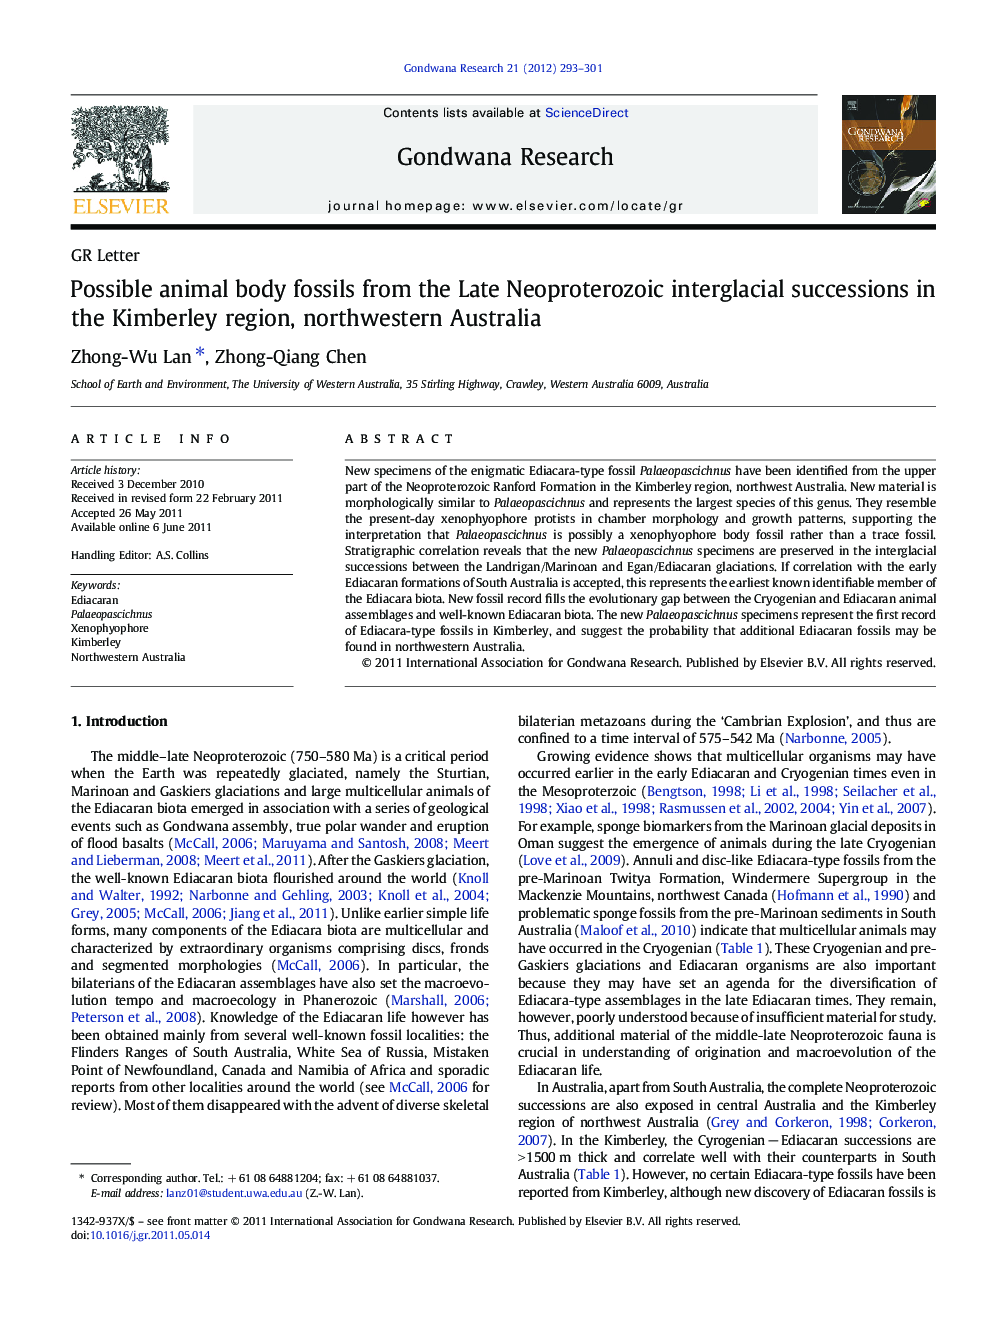 Possible animal body fossils from the Late Neoproterozoic interglacial successions in the Kimberley region, northwestern Australia